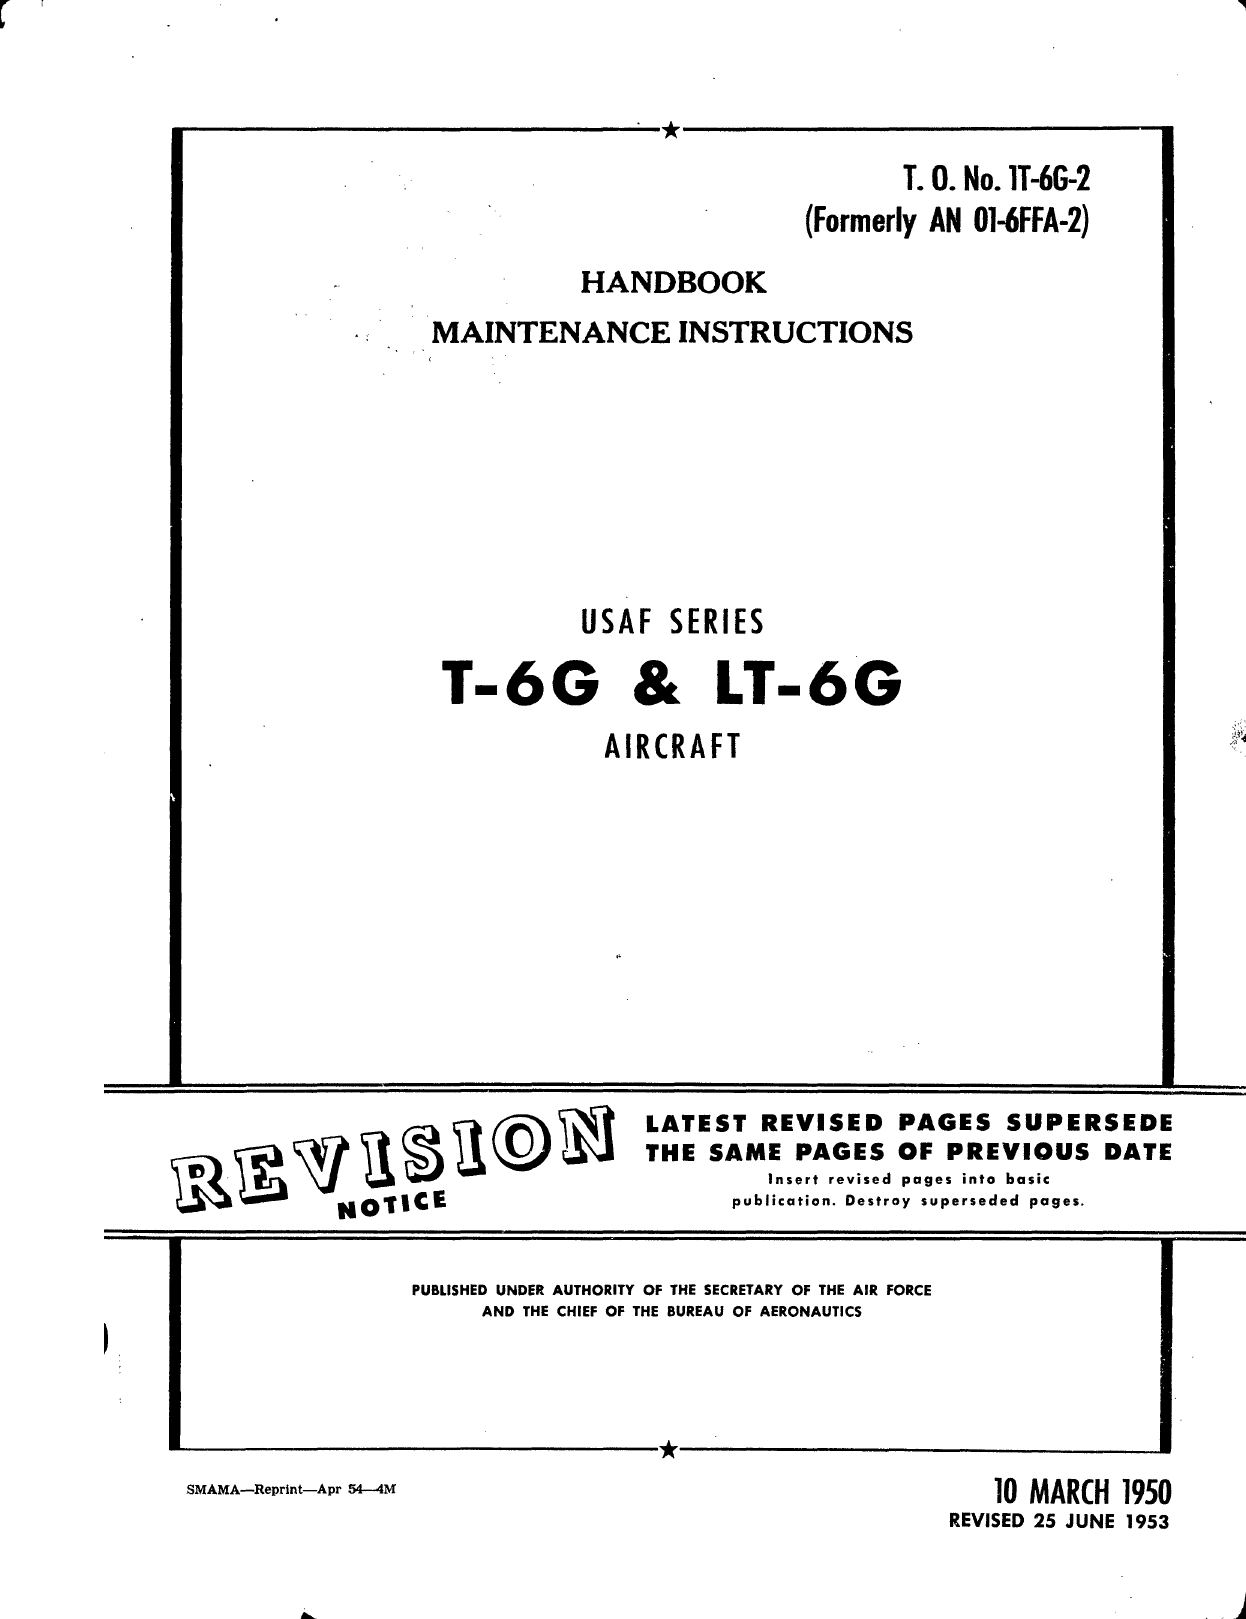 Sample page 1 from AirCorps Library document: Maintenance Instructions for T-6G and LT-6G Aircraft